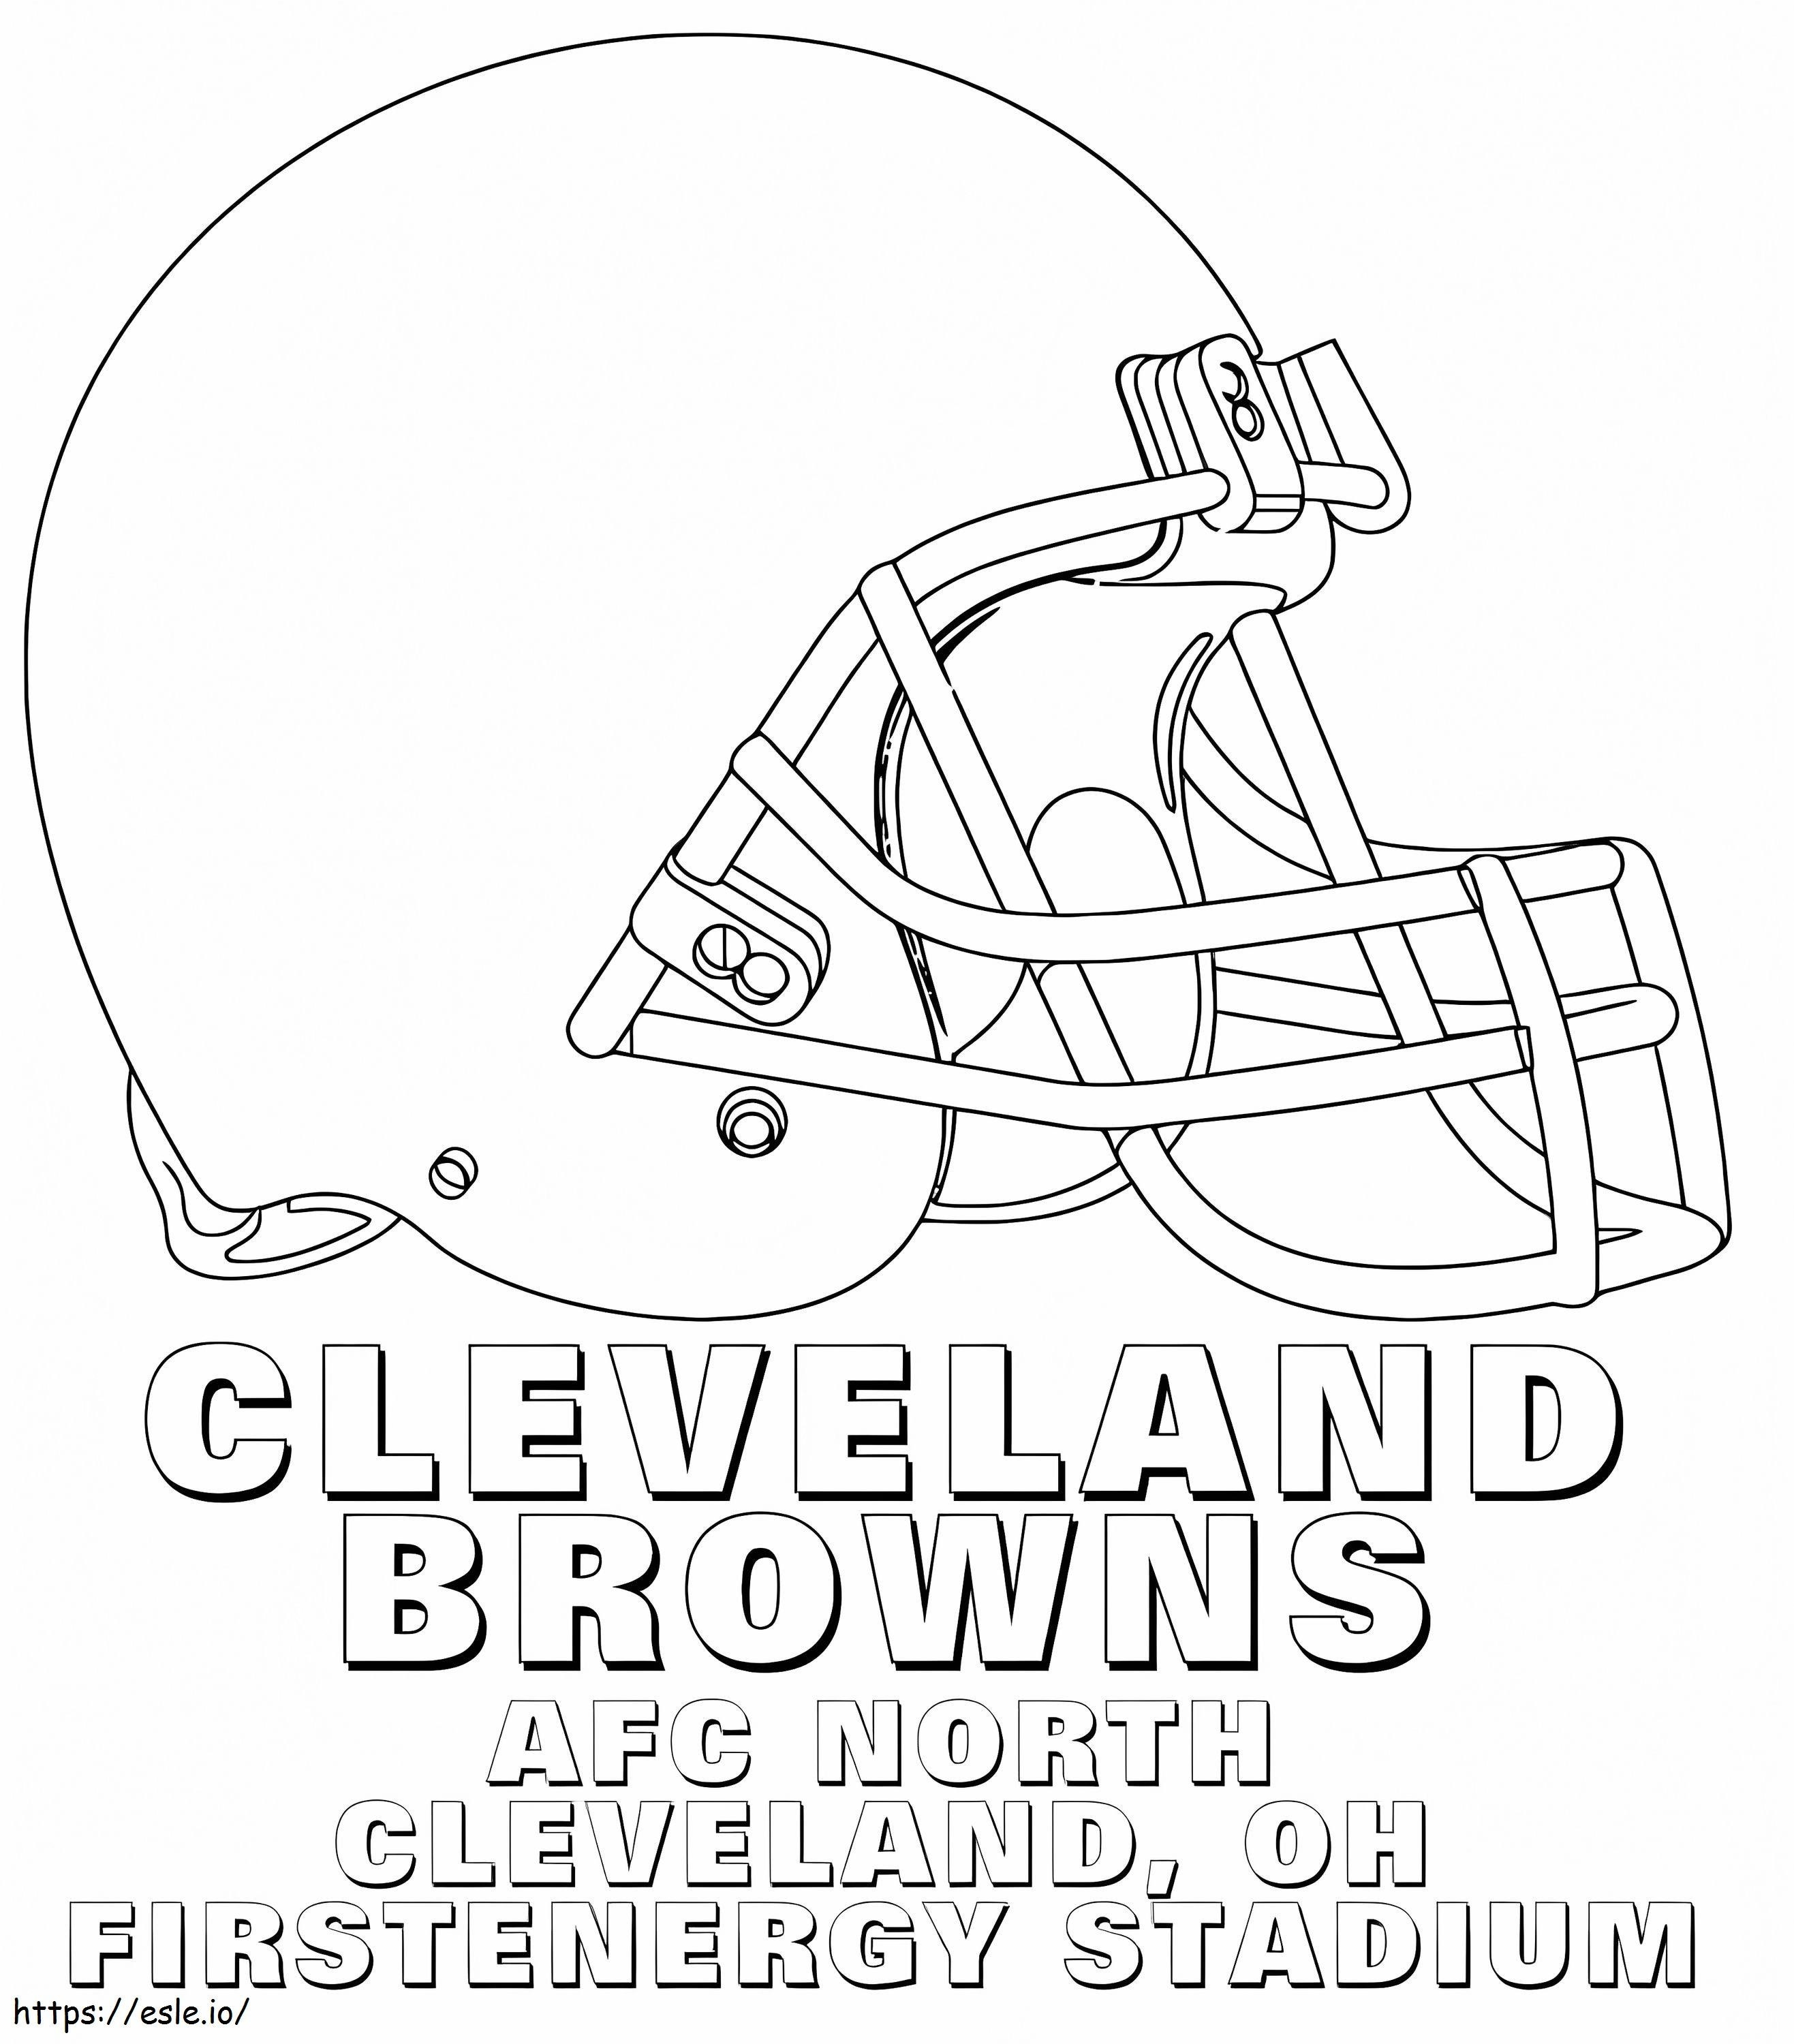 Cleveland Browns 2 coloring page